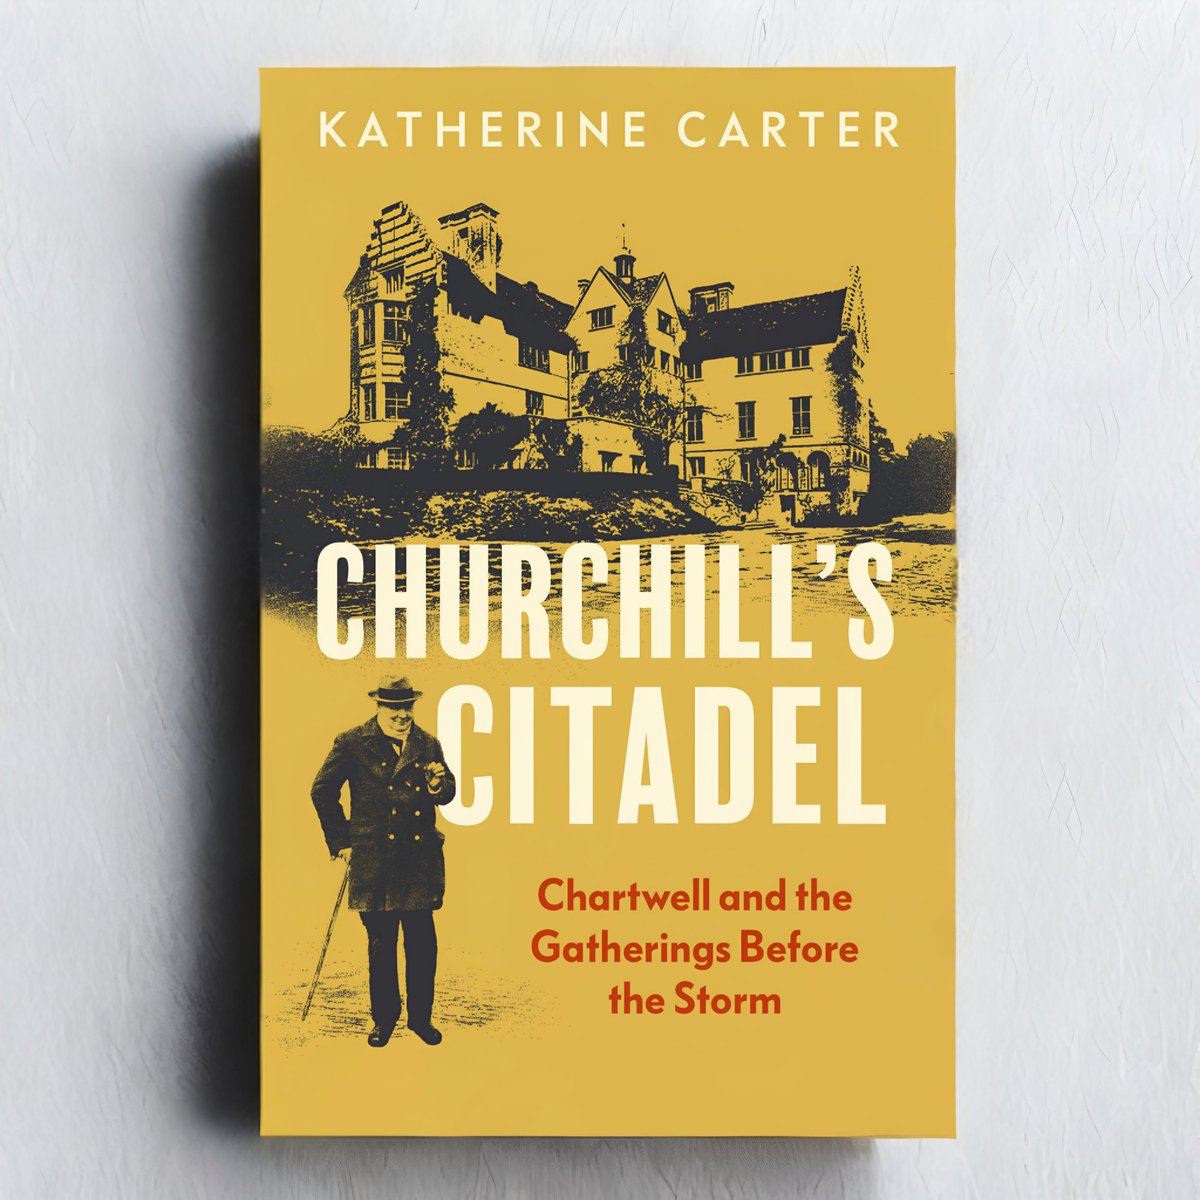 🚨 Book Title & Cover Reveal 🚨 I'm delighted to announce that my book 'Churchill's Citadel' will be published by @YalePress/@YaleBooks this autumn and is available to preorder *now*: 🇬🇧 amzn.to/4cRxE4N 🇺🇸 amzn.to/3TXU1wz #ChurchillsCitadel 📖